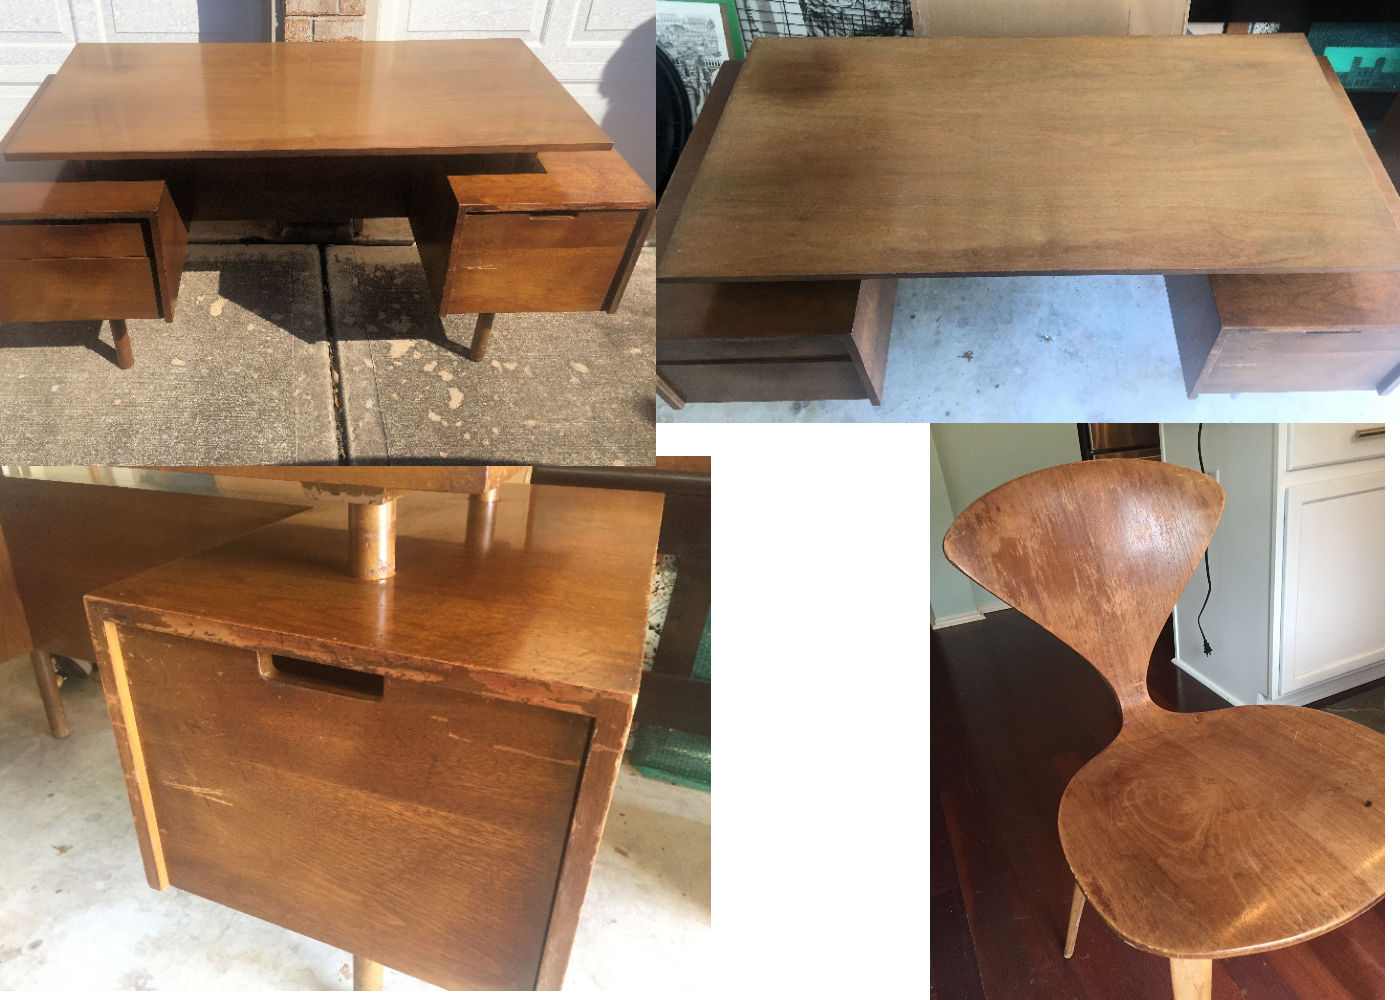 Refinishing Advice On Baughman Desk And Cherner Chairs Repair